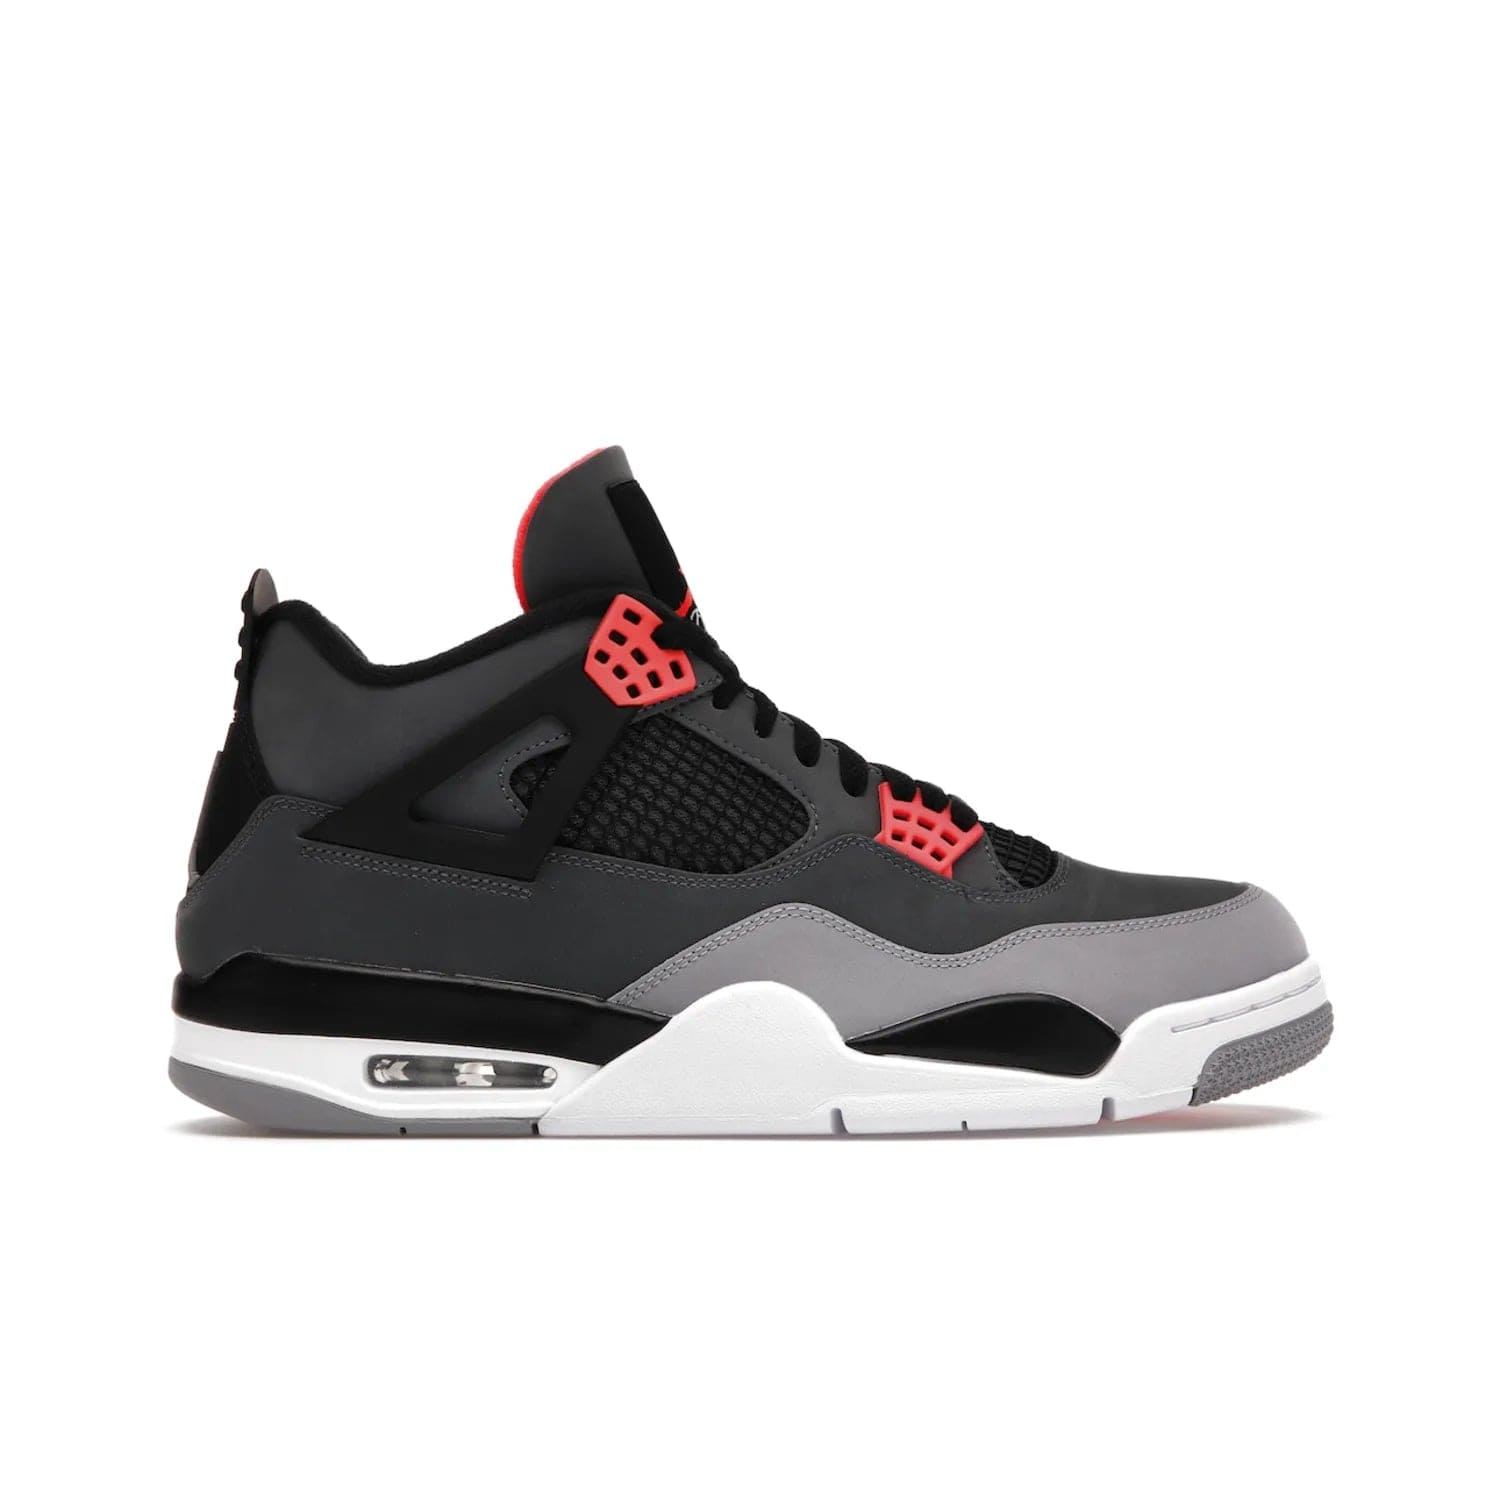 Jordan 4 Retro Infrared - Image 1 - Only at www.BallersClubKickz.com - Introducing the classic & timeless Air Jordan 4 Infrared. Durabuck upper, TPU mesh inserts, tech straps & heel tabs in dark grey and infrared accents. White sole with visible Air units. Out June 15, 2022. Get your pair now!